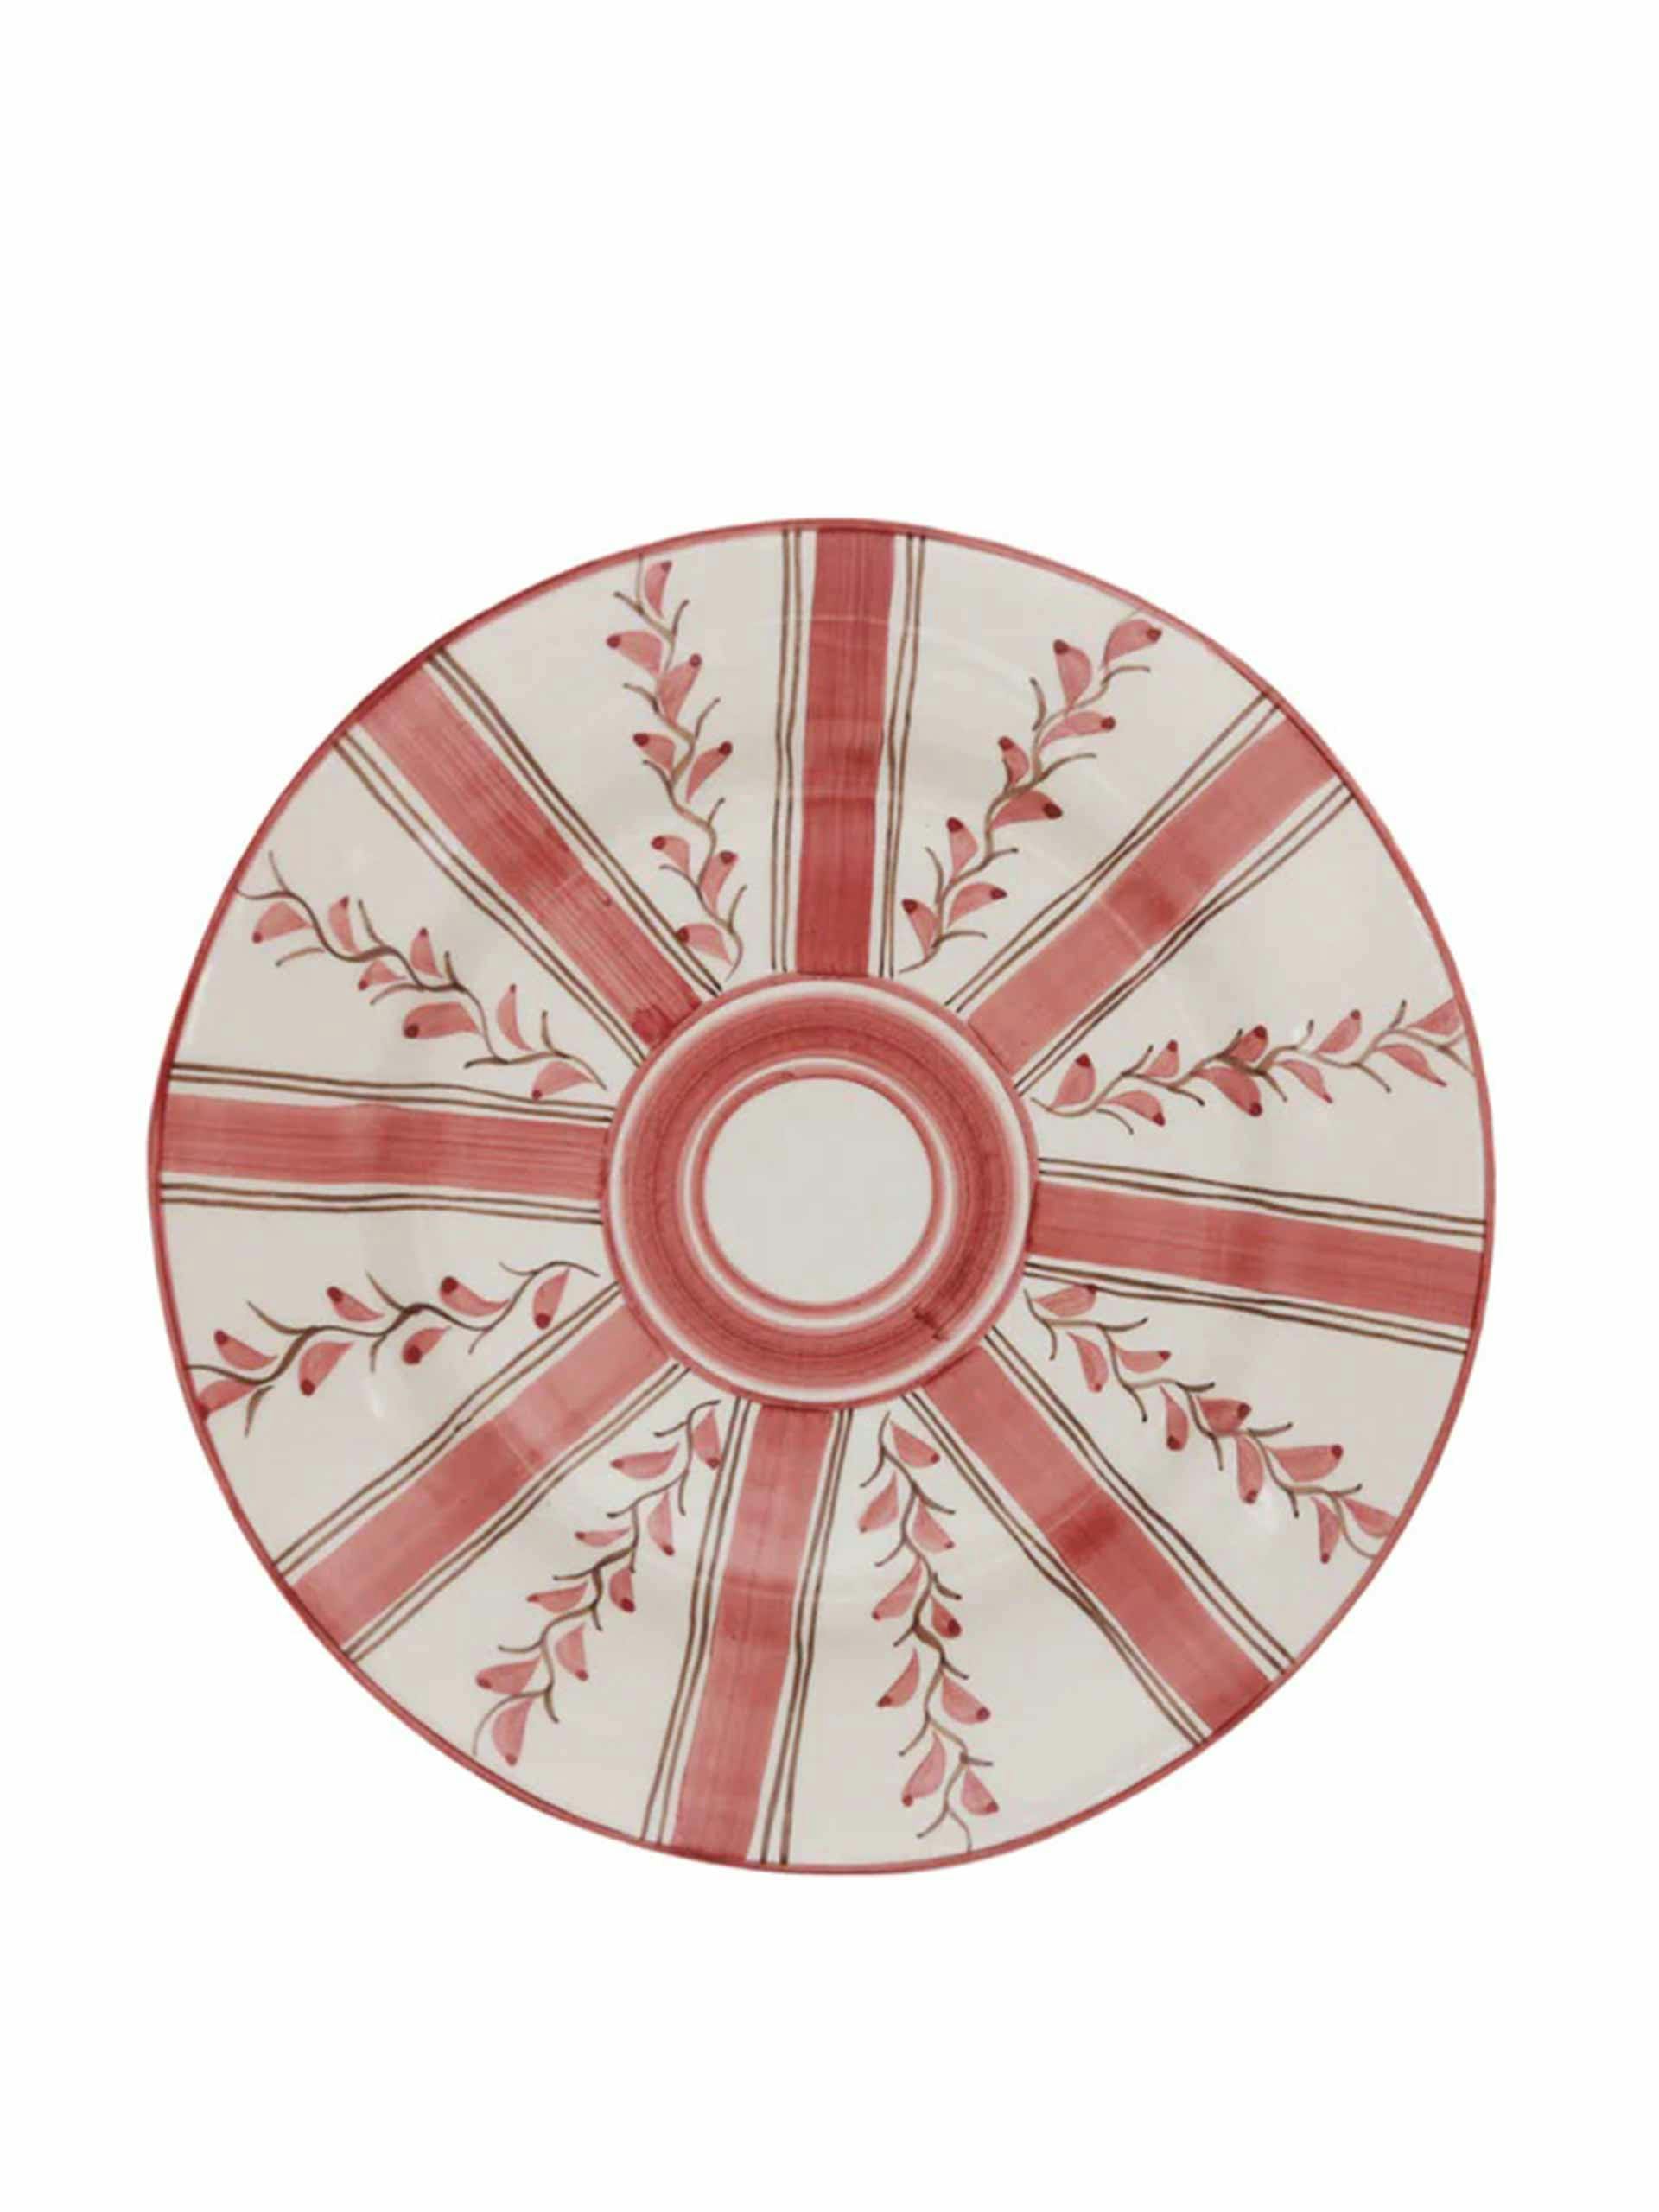 Hand painted rose stripe plate